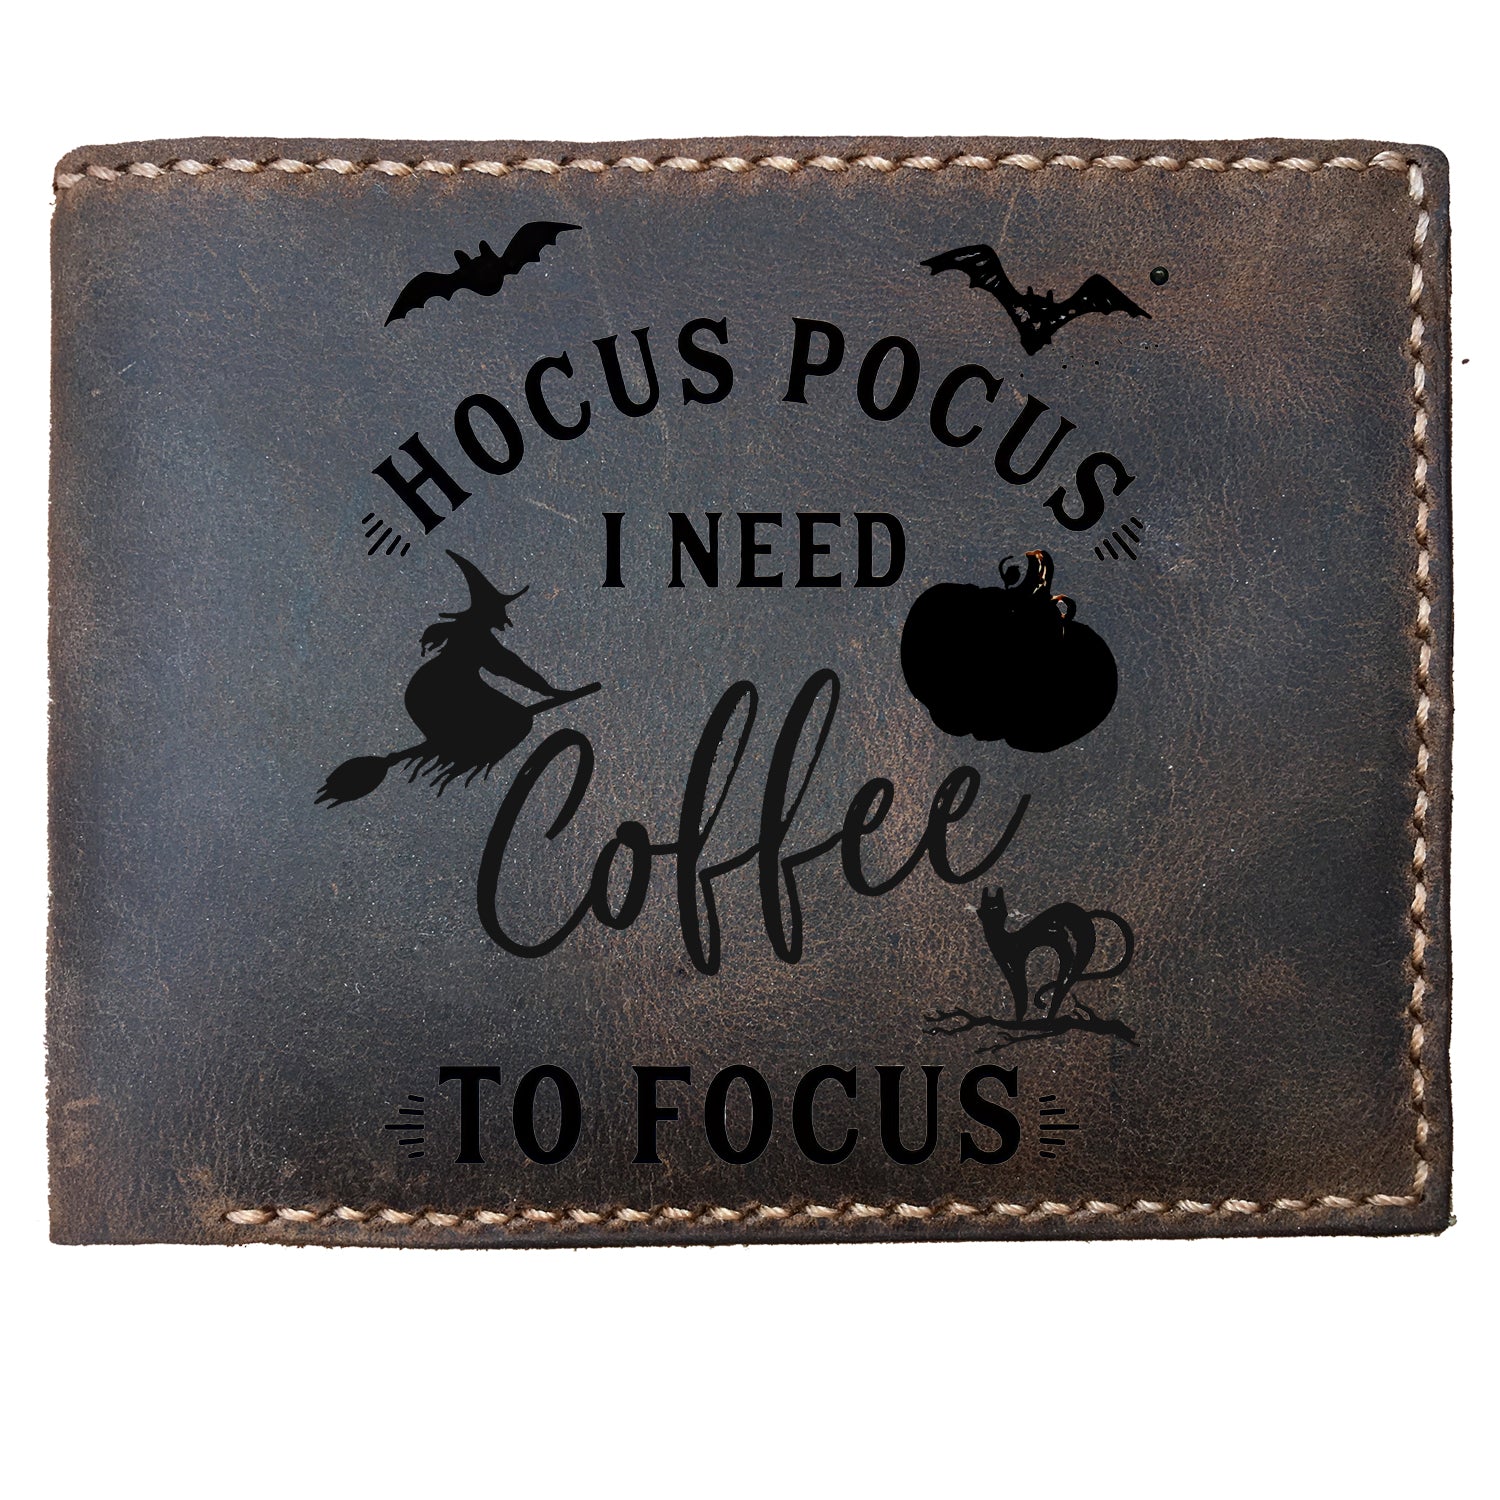 Funny Skitongifts Custom Laser Engraved Bifold Leather Wallet For Men, Hocus Pocus I Need Coffee To Focus